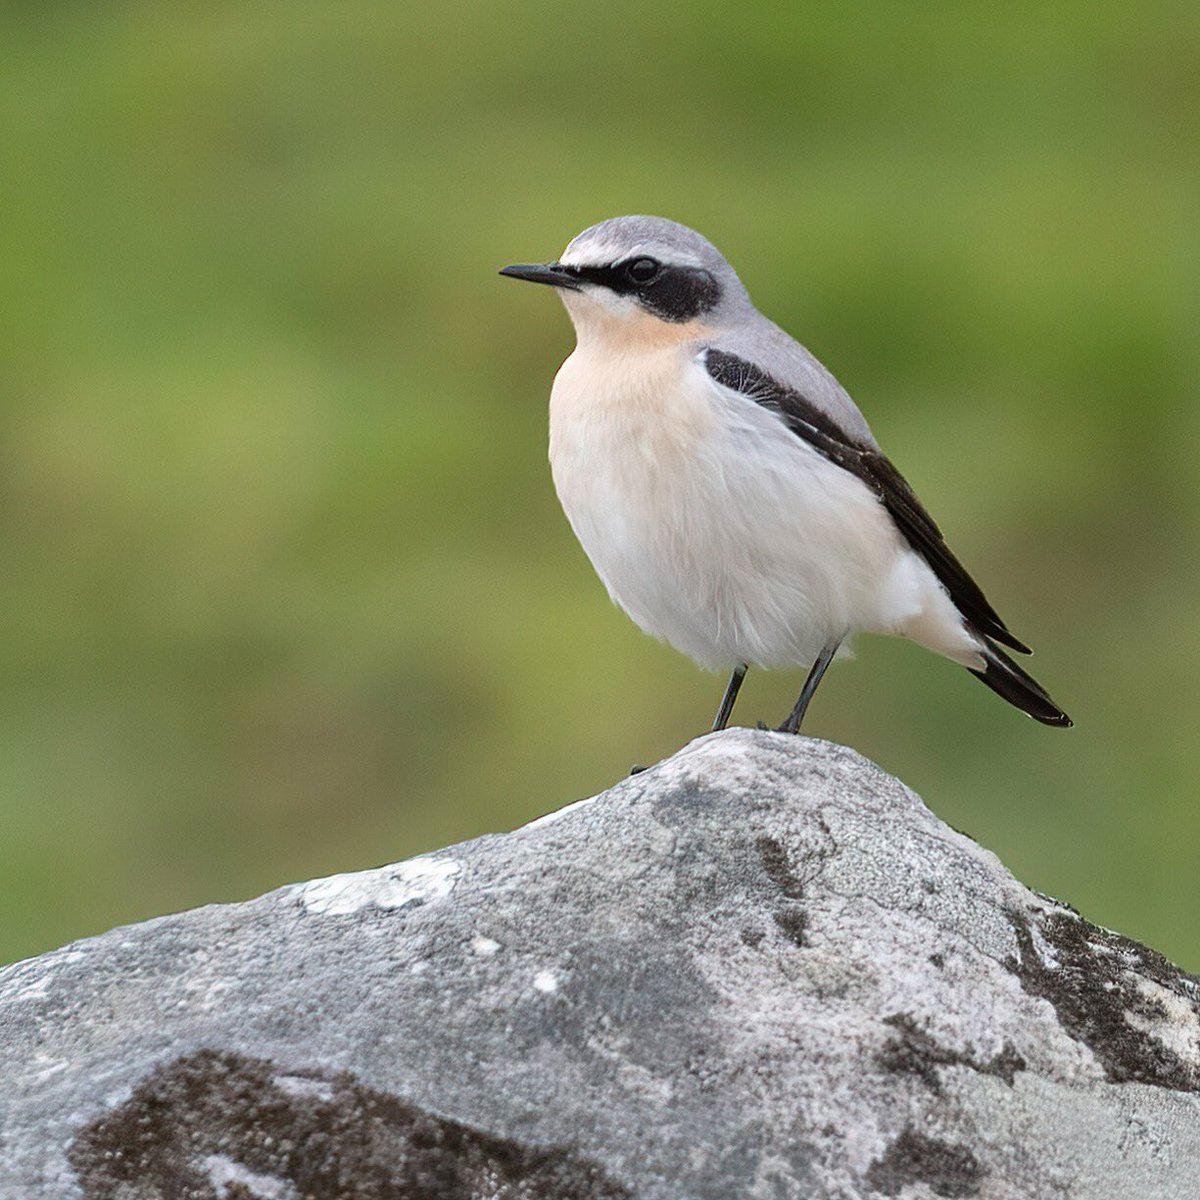 Spring migration is on its way! Same date and place as last year. #wheatear #springmigration #wiltsbirds